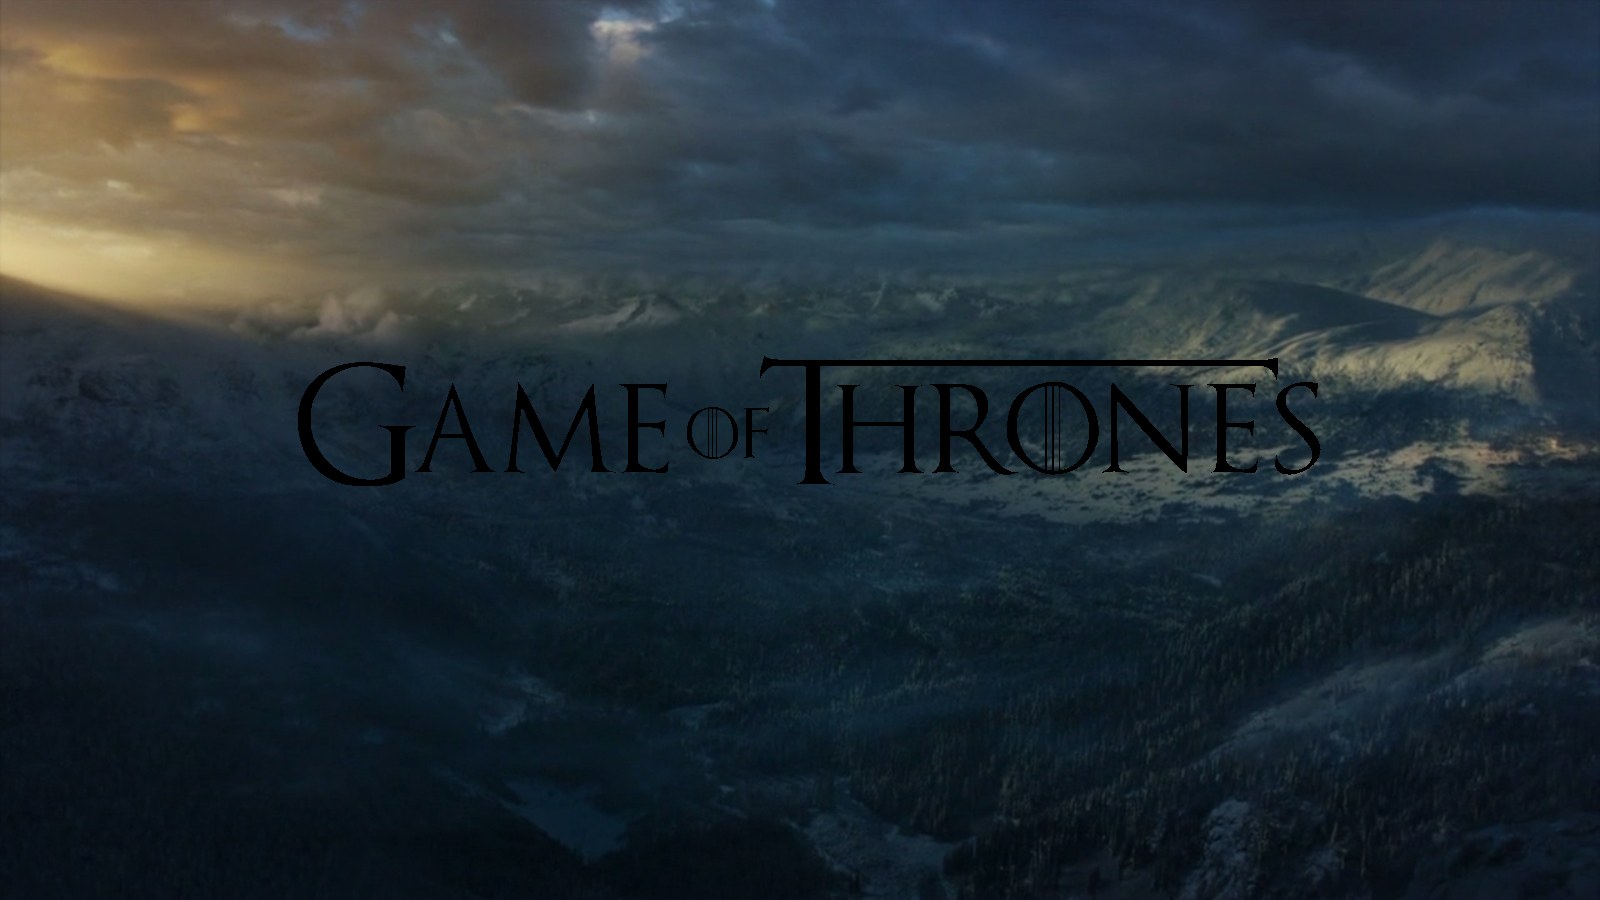 Game Of Thrones Iphone Wallpaper Dragons Game of thrones background 1600x900